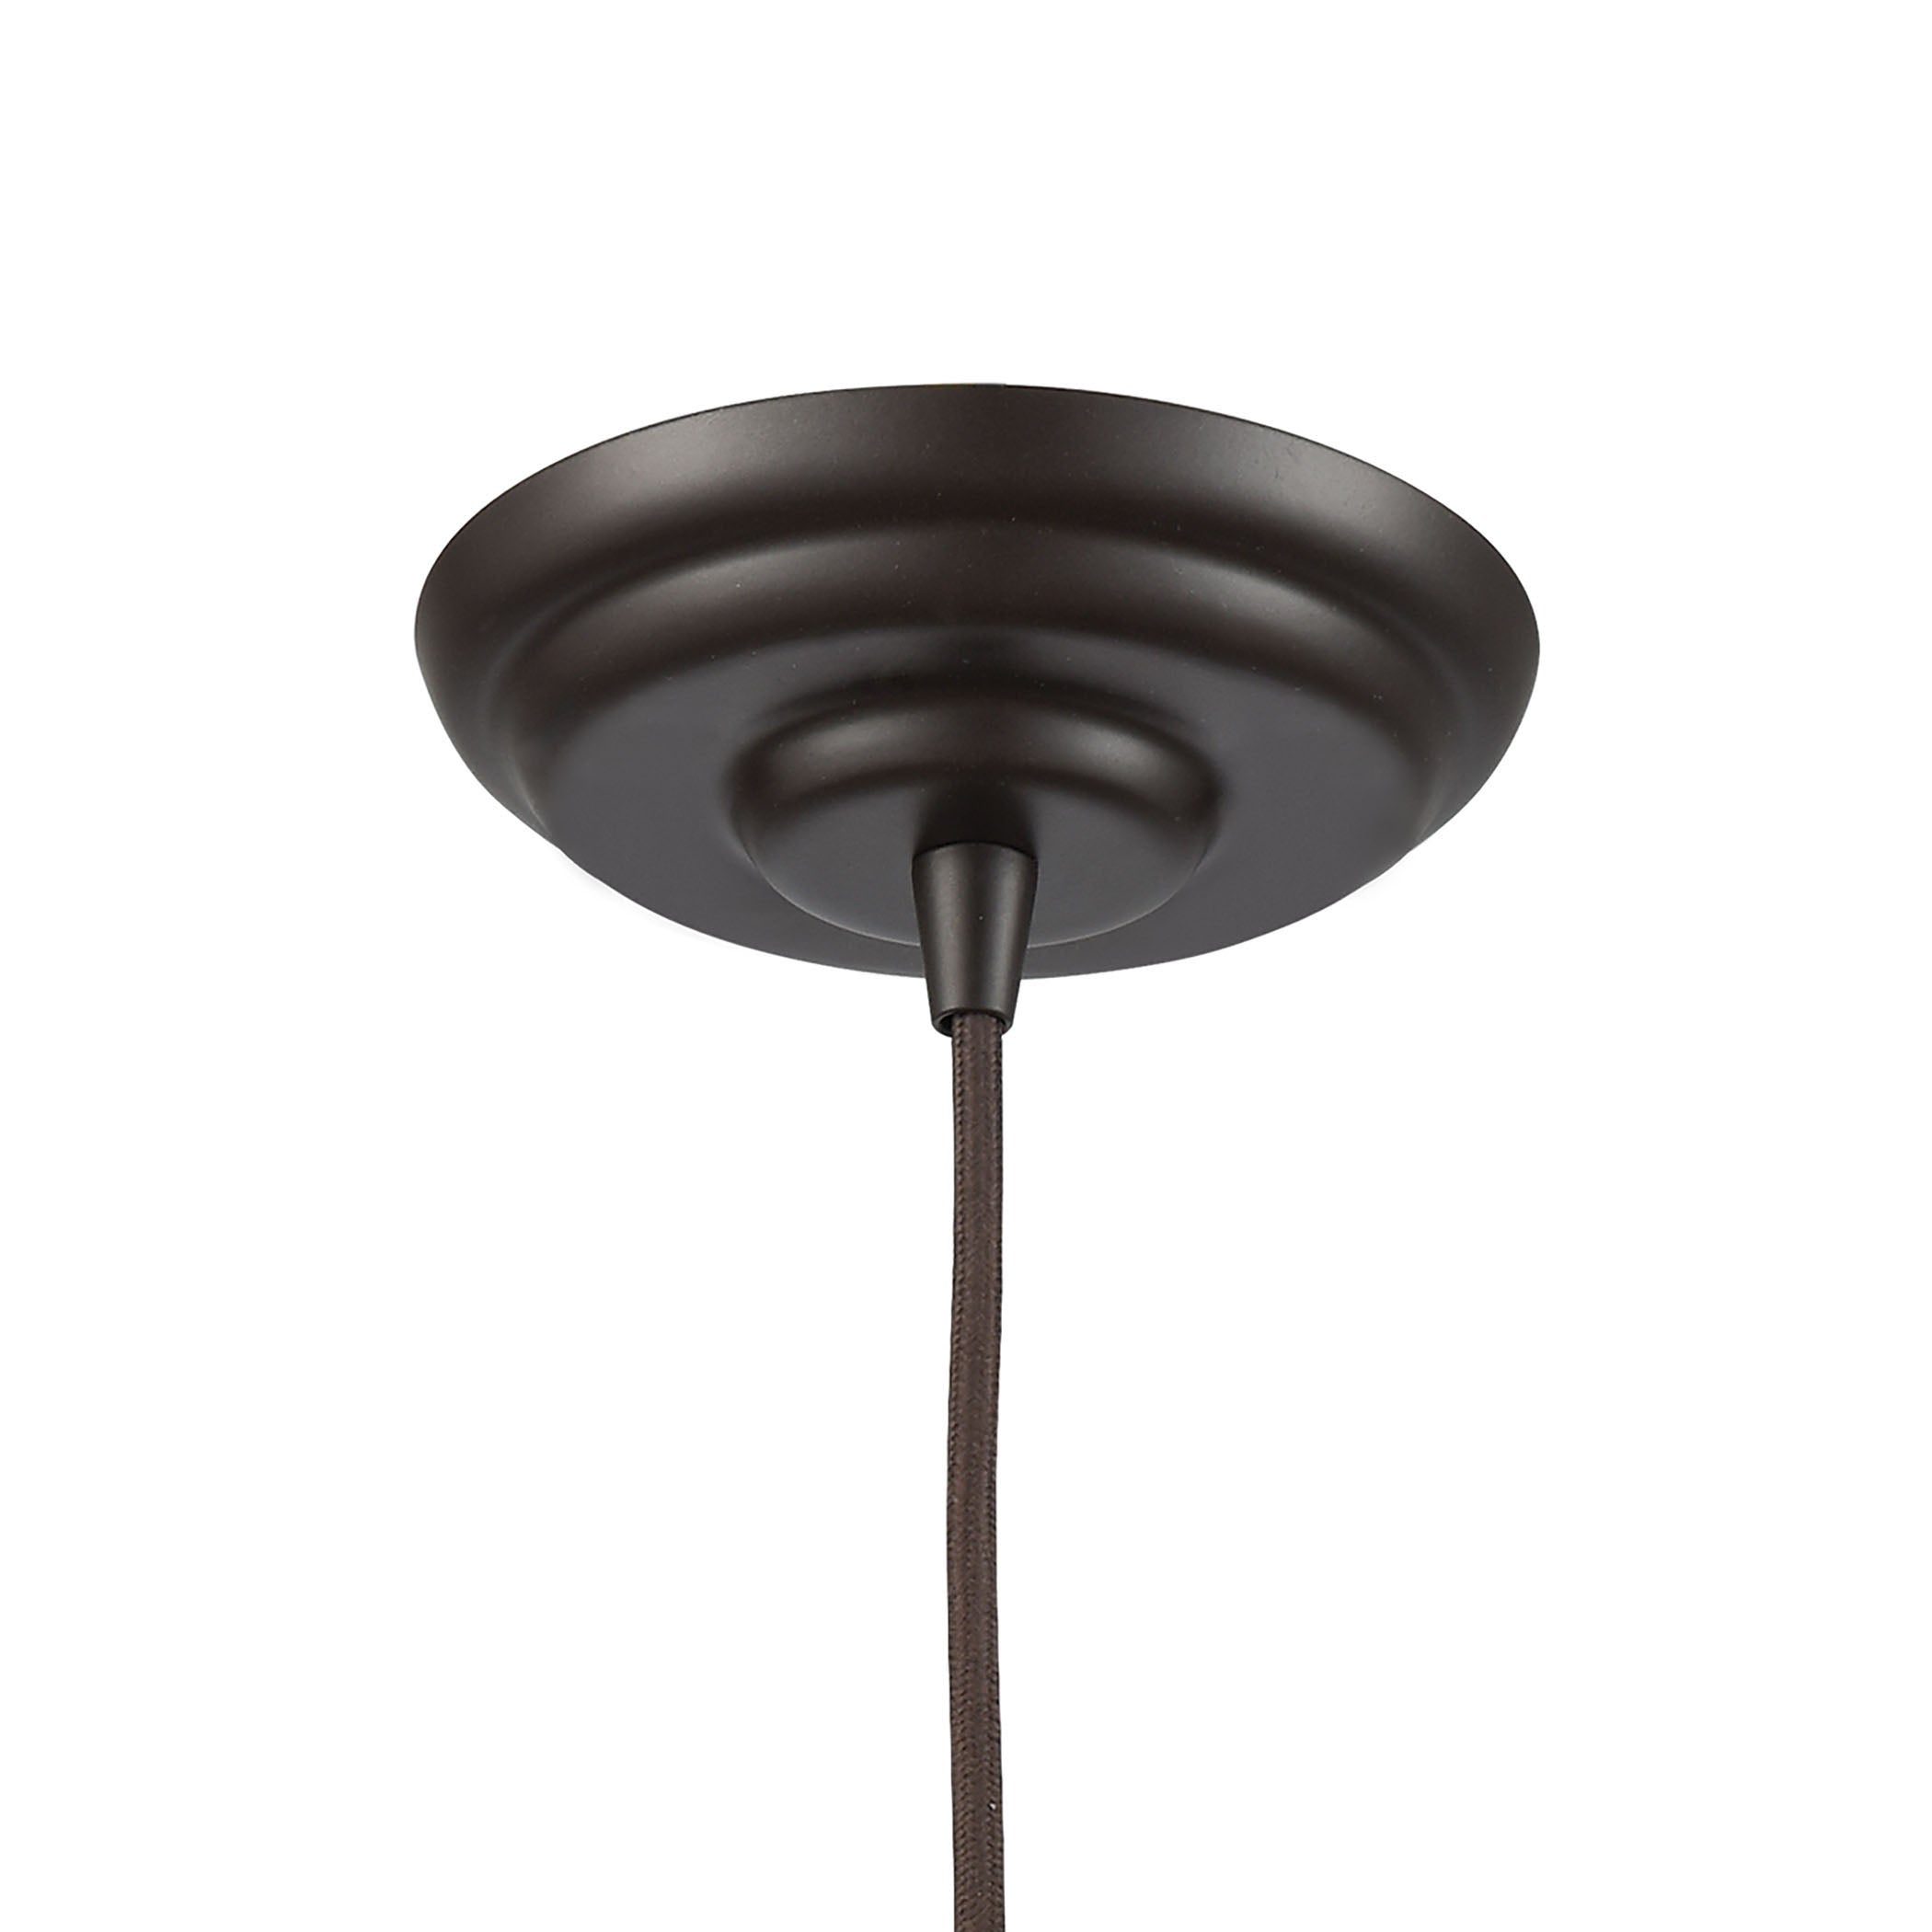 ELK Lighting 56603/1 Warehouse Pendant 1-Light Pendant in Oil Rubbed Bronze with Metal Shade and Cage